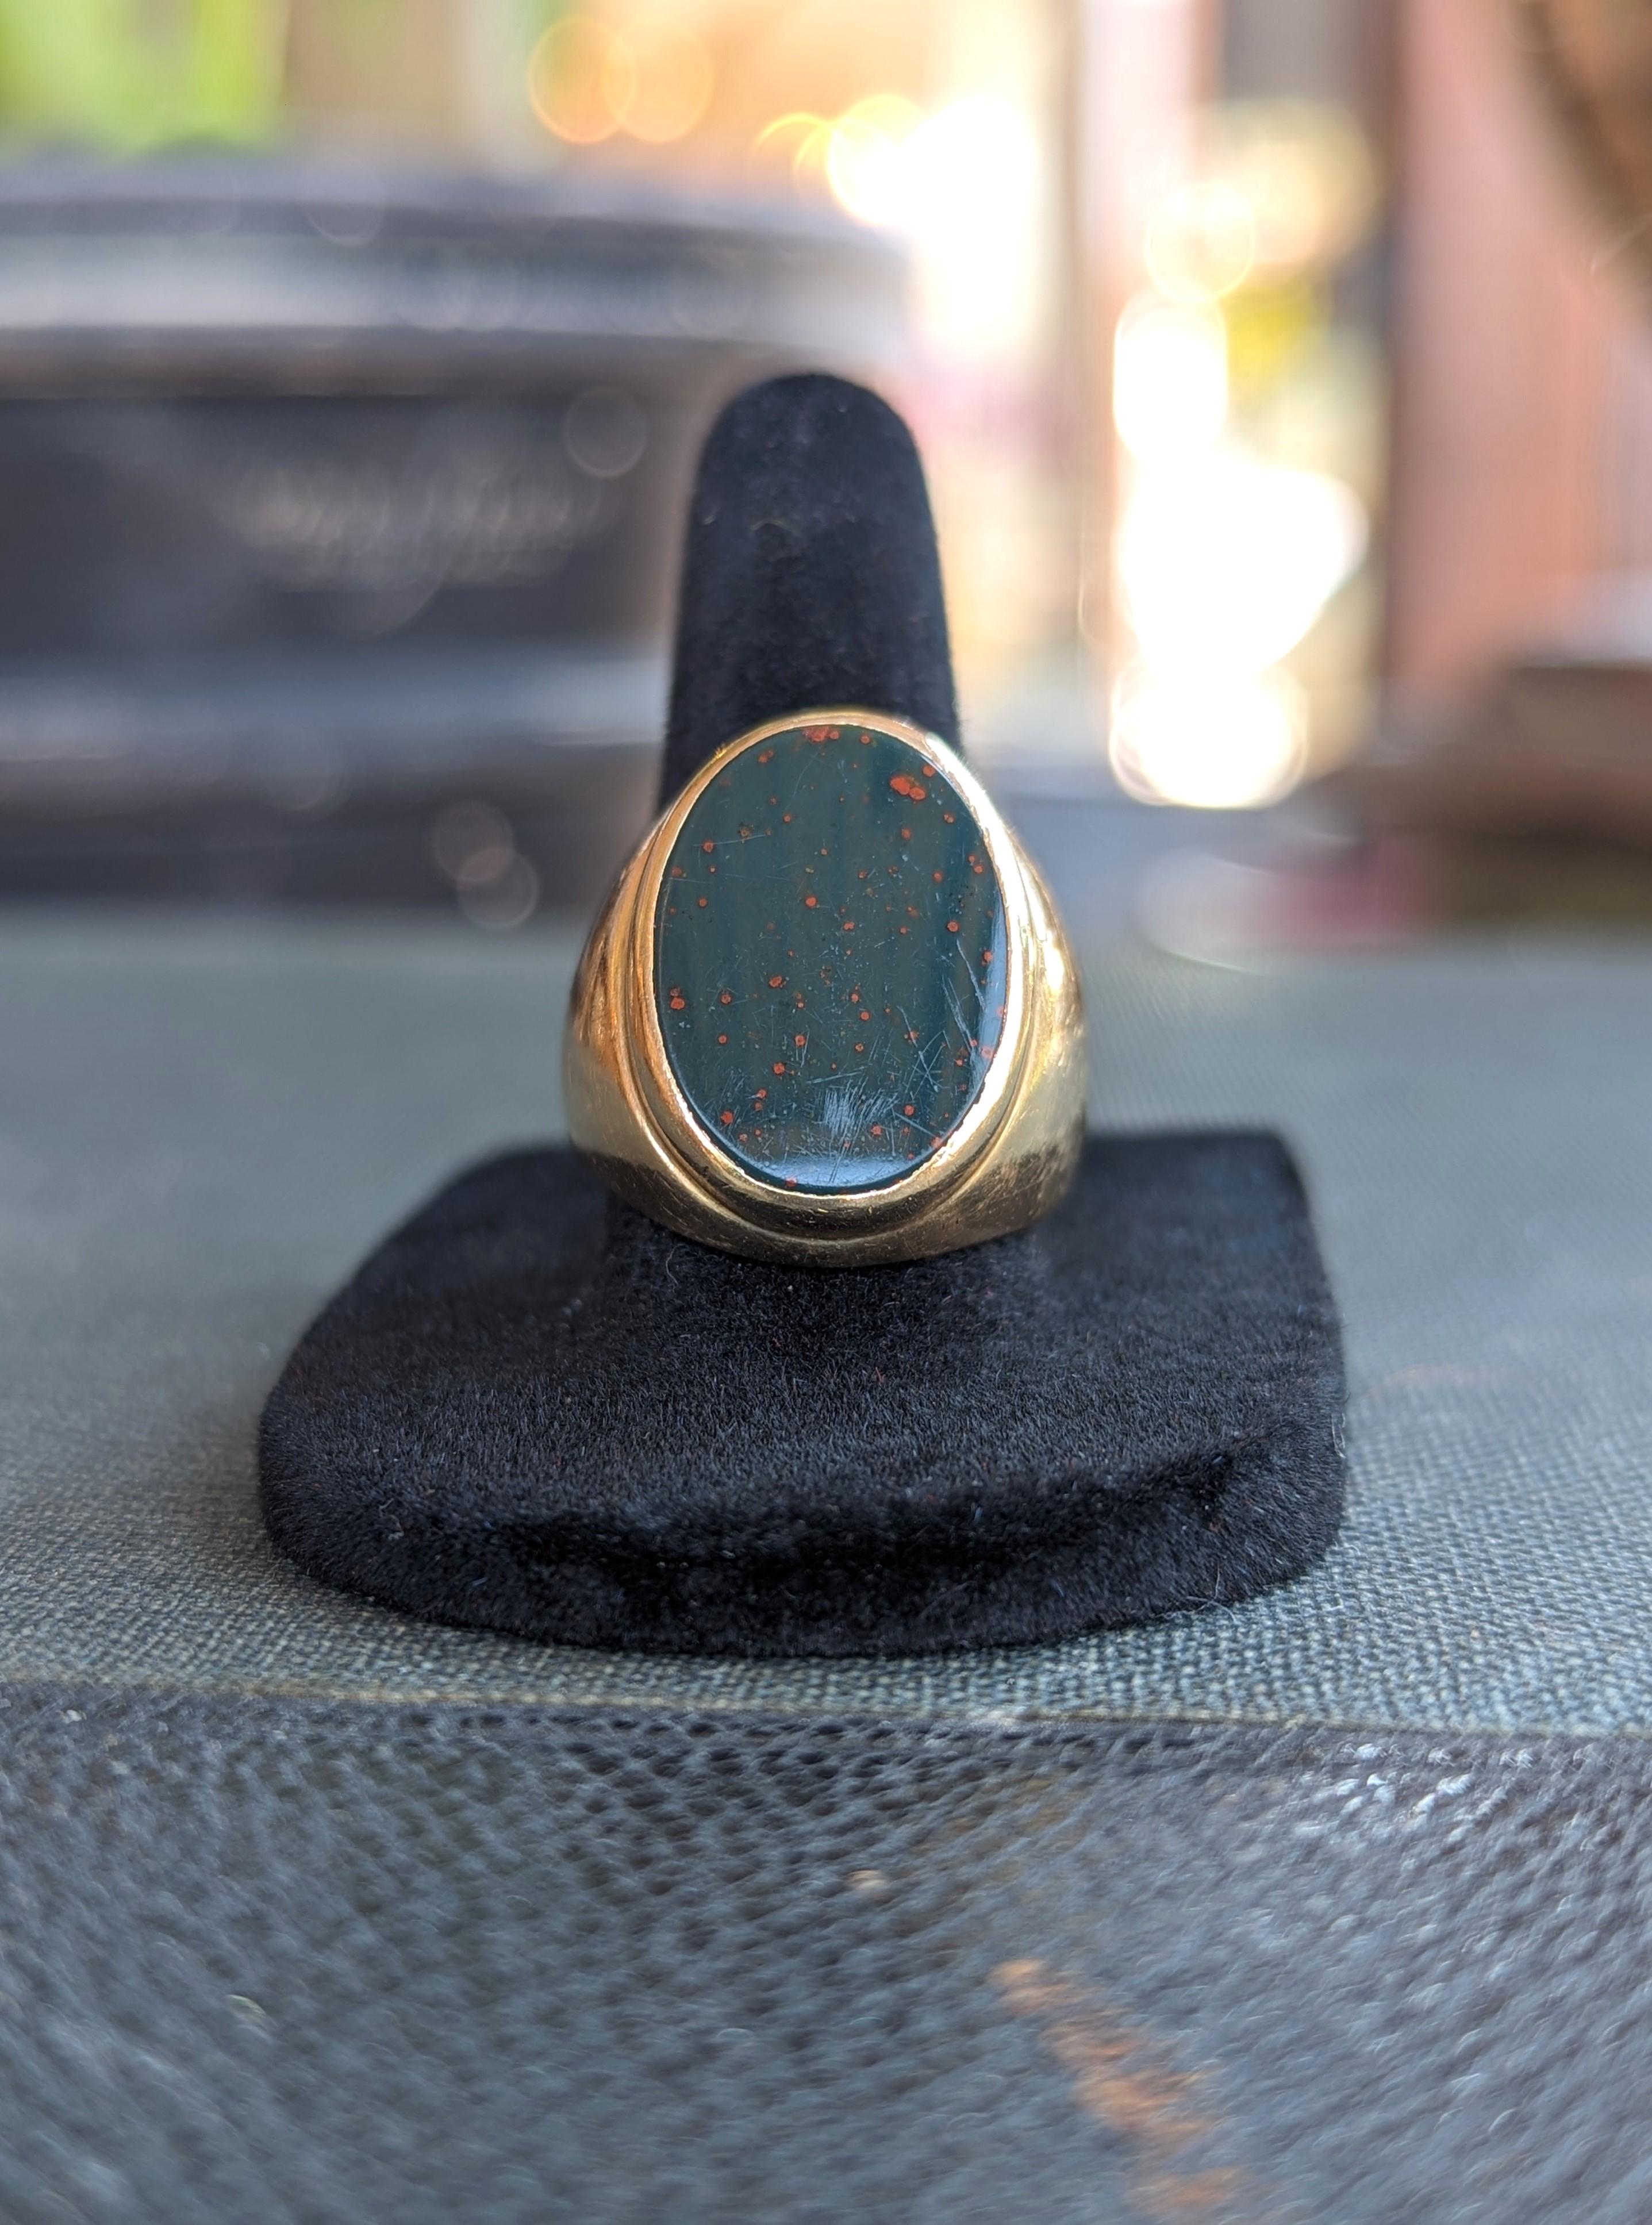 Superb vintage 14k bloodstone signet ring with a great mid century modern design by Ludwig Fessner Co. This statement piece is great for collectors of classic modernist jewelry. Best measures for a size 5.5 finger. Measures .75 inch in height by .55